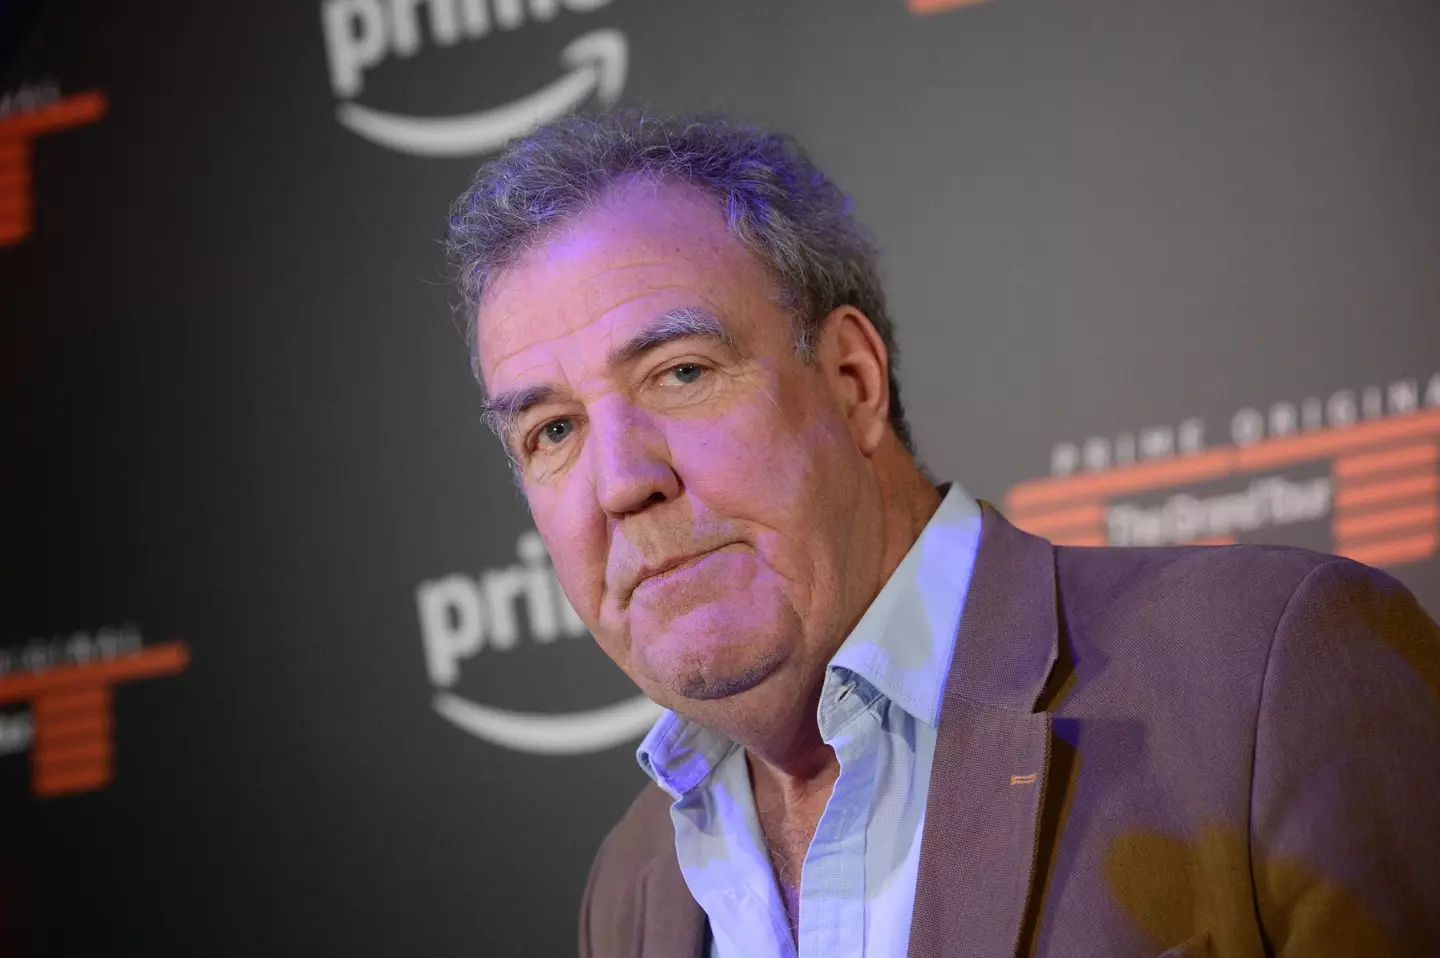 Jeremy Clarkson labelled Twitter a 'cesspit' in a recent column.